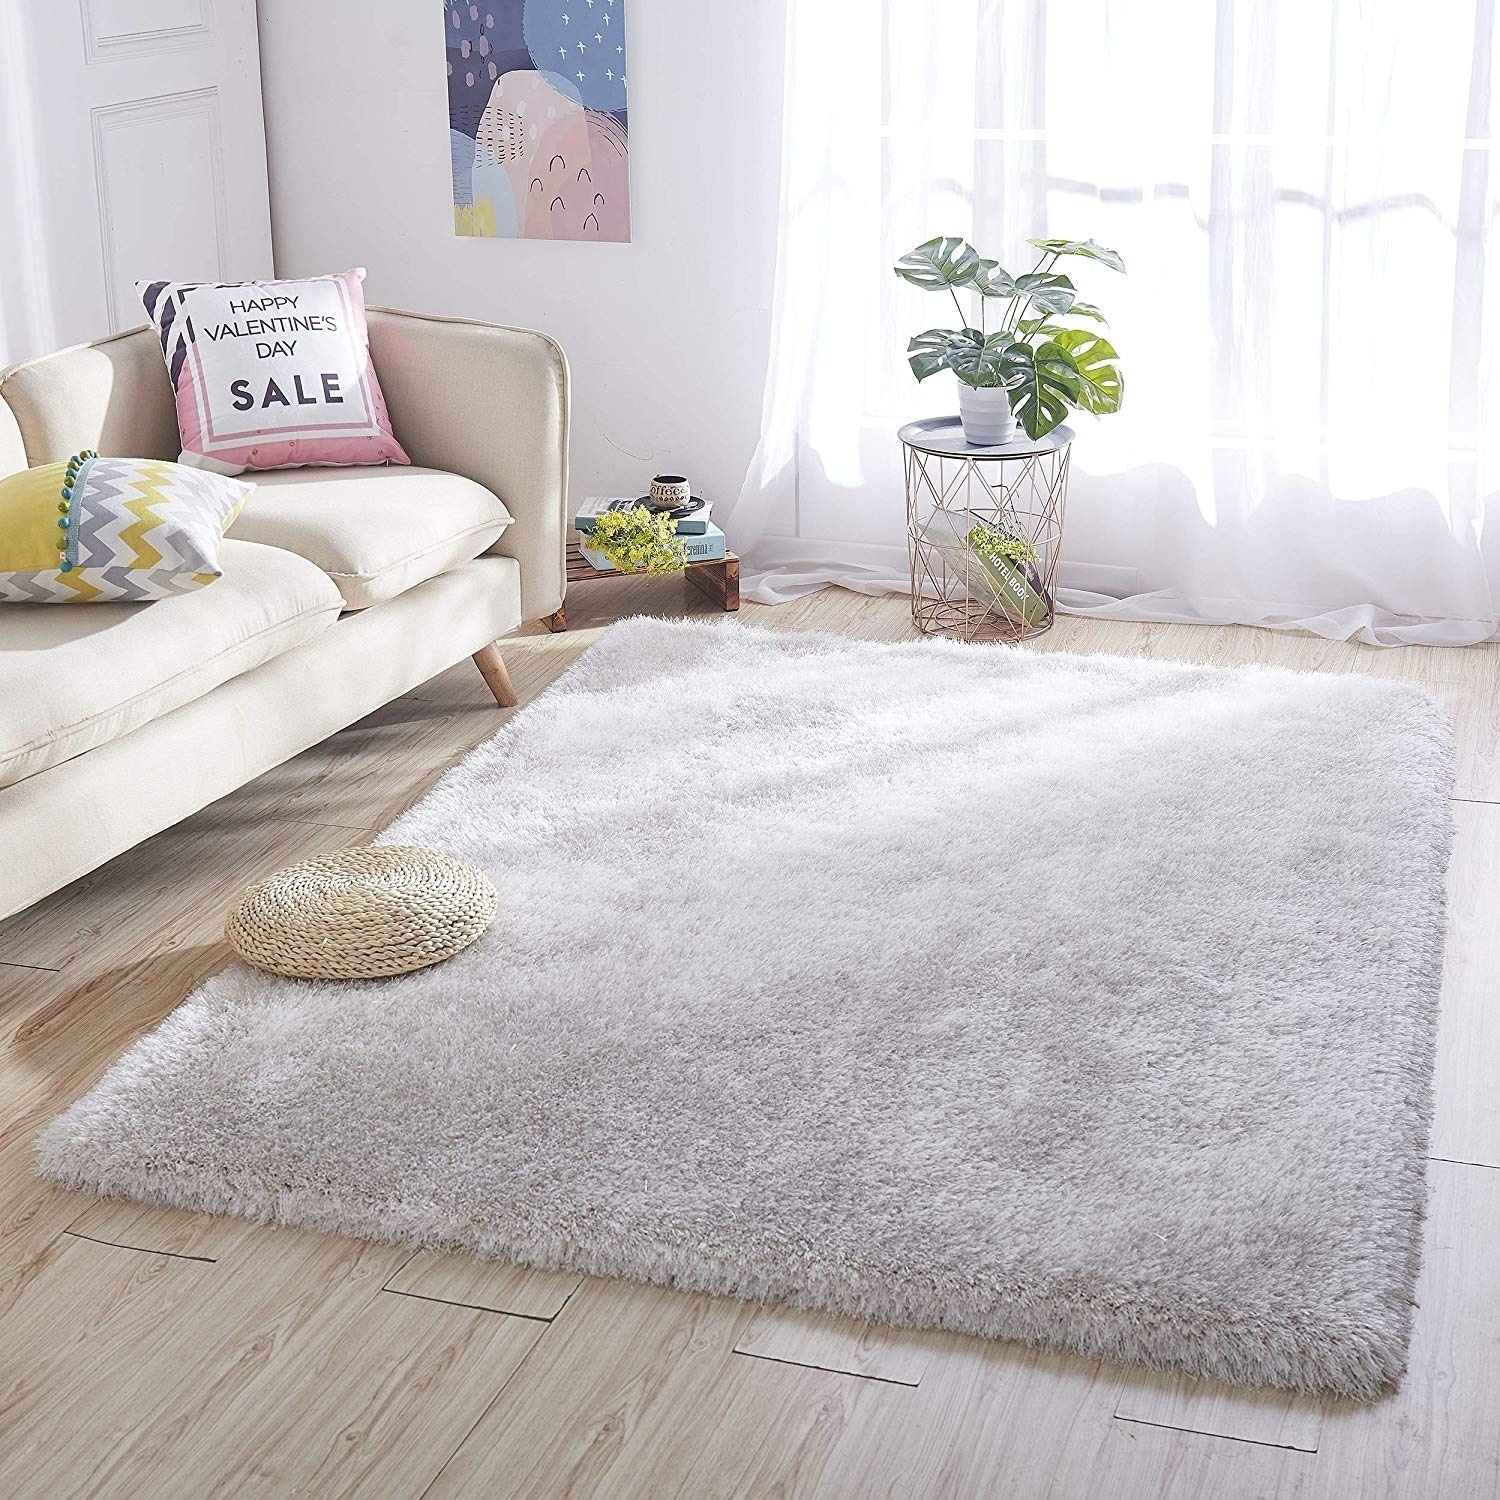 30mm HIGH PILE SHAGGY RUG SMALL EXTRA LARGE THICK SOFT LIVING ROOM FLOOR BEDROOM 